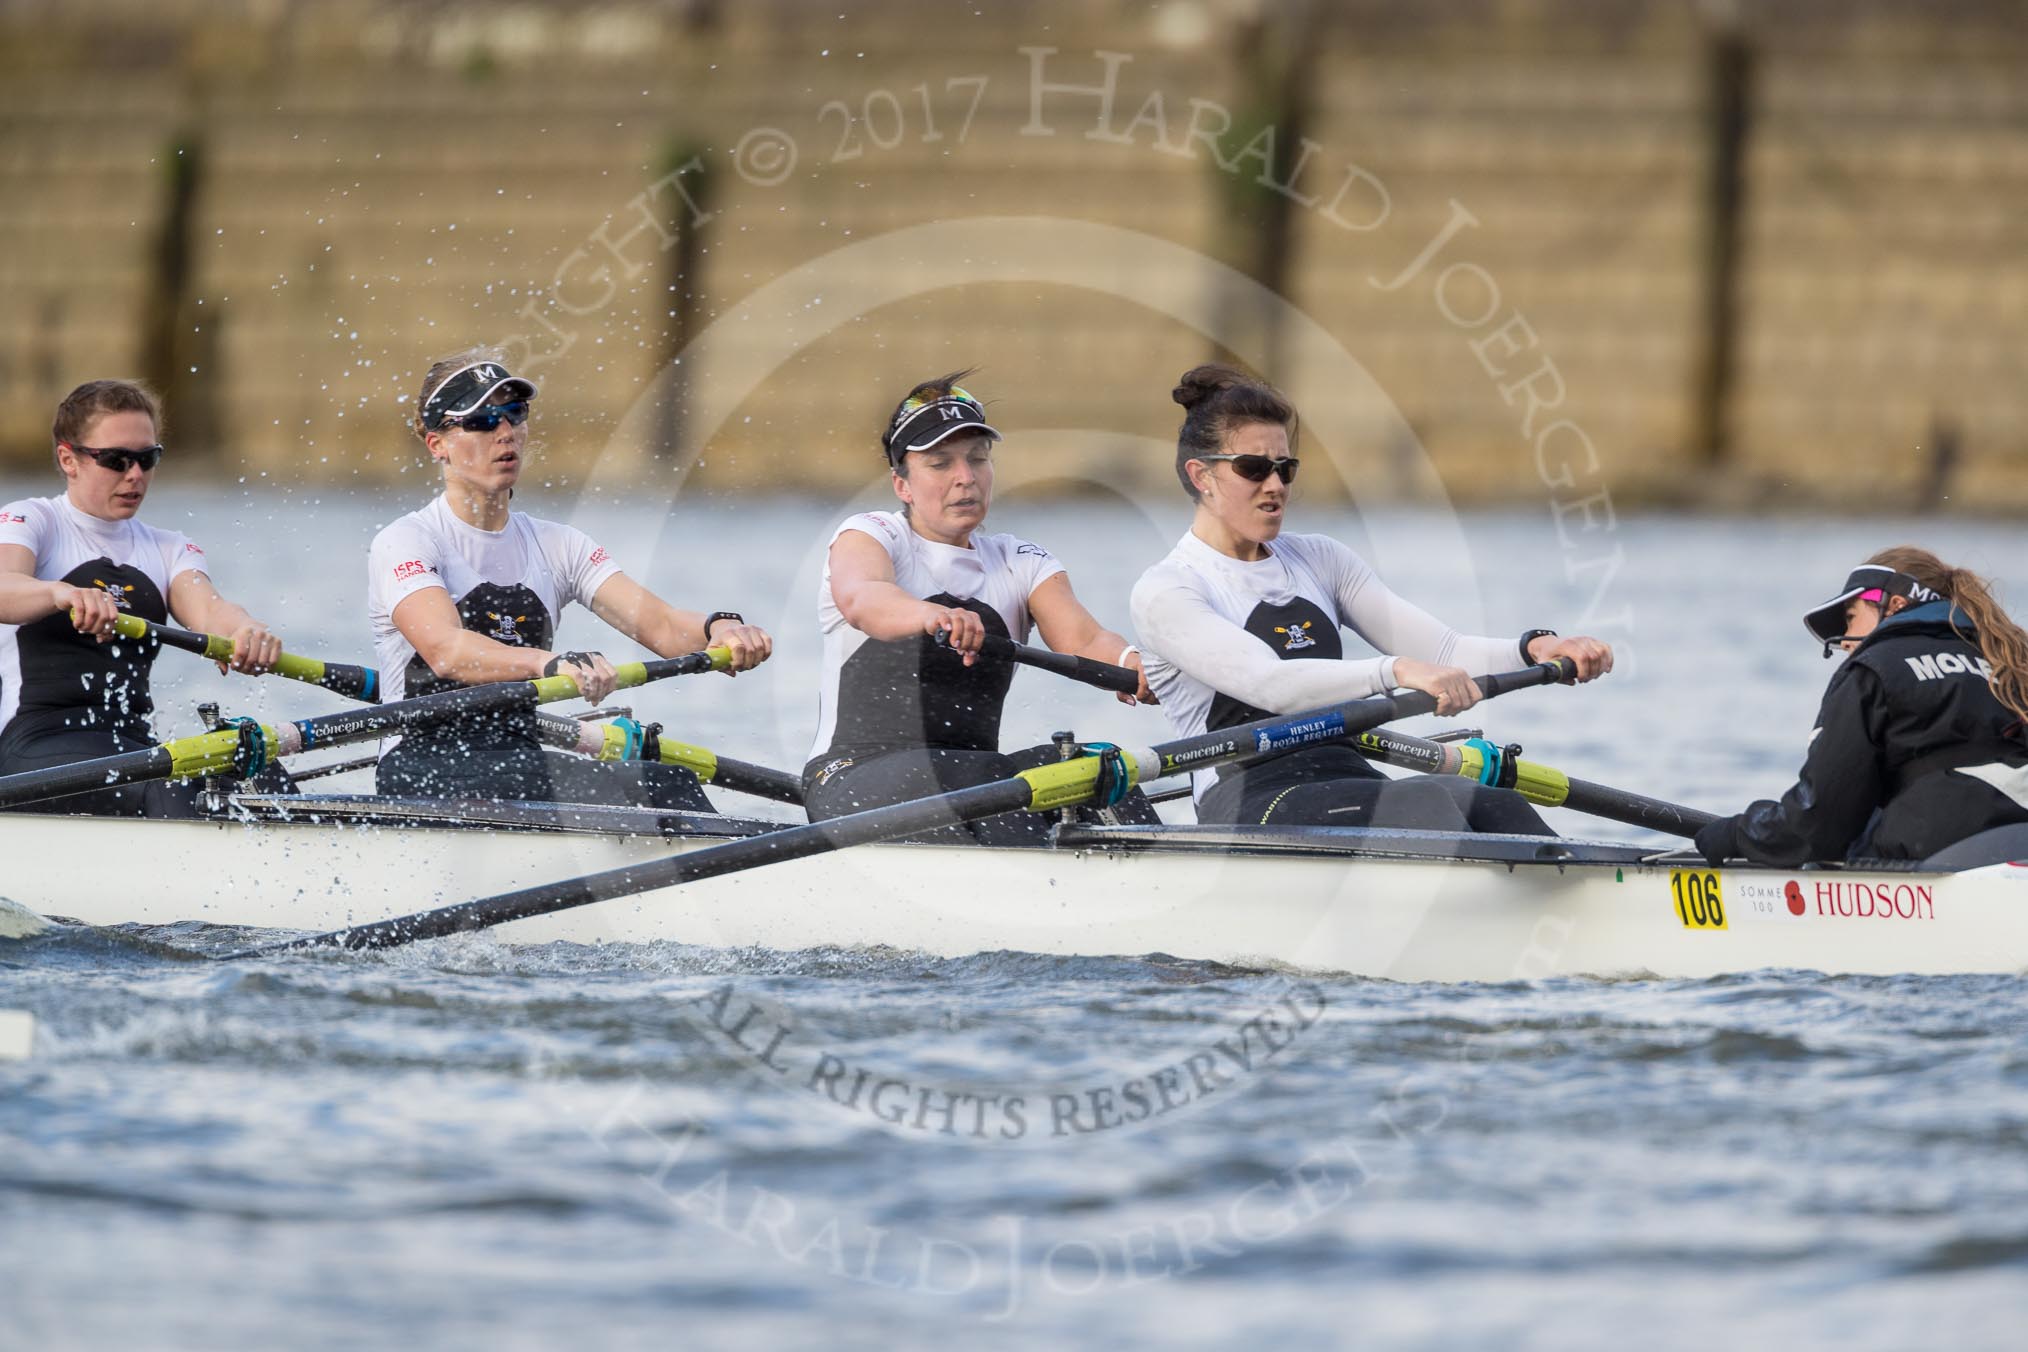 The Cancer Research UK Boat Race season 2017 - Women's Boat Race Fixture OUWBC vs Molesey BC: Molesey in the early phase of the race - 5 Katie Bartlett, 6 Elo Luik, 7 Gabriella Rodriguez, stroke Ruth Whyman, cox Anna Corderoy.
River Thames between Putney Bridge and Mortlake,
London SW15,

United Kingdom,
on 19 March 2017 at 16:03, image #64